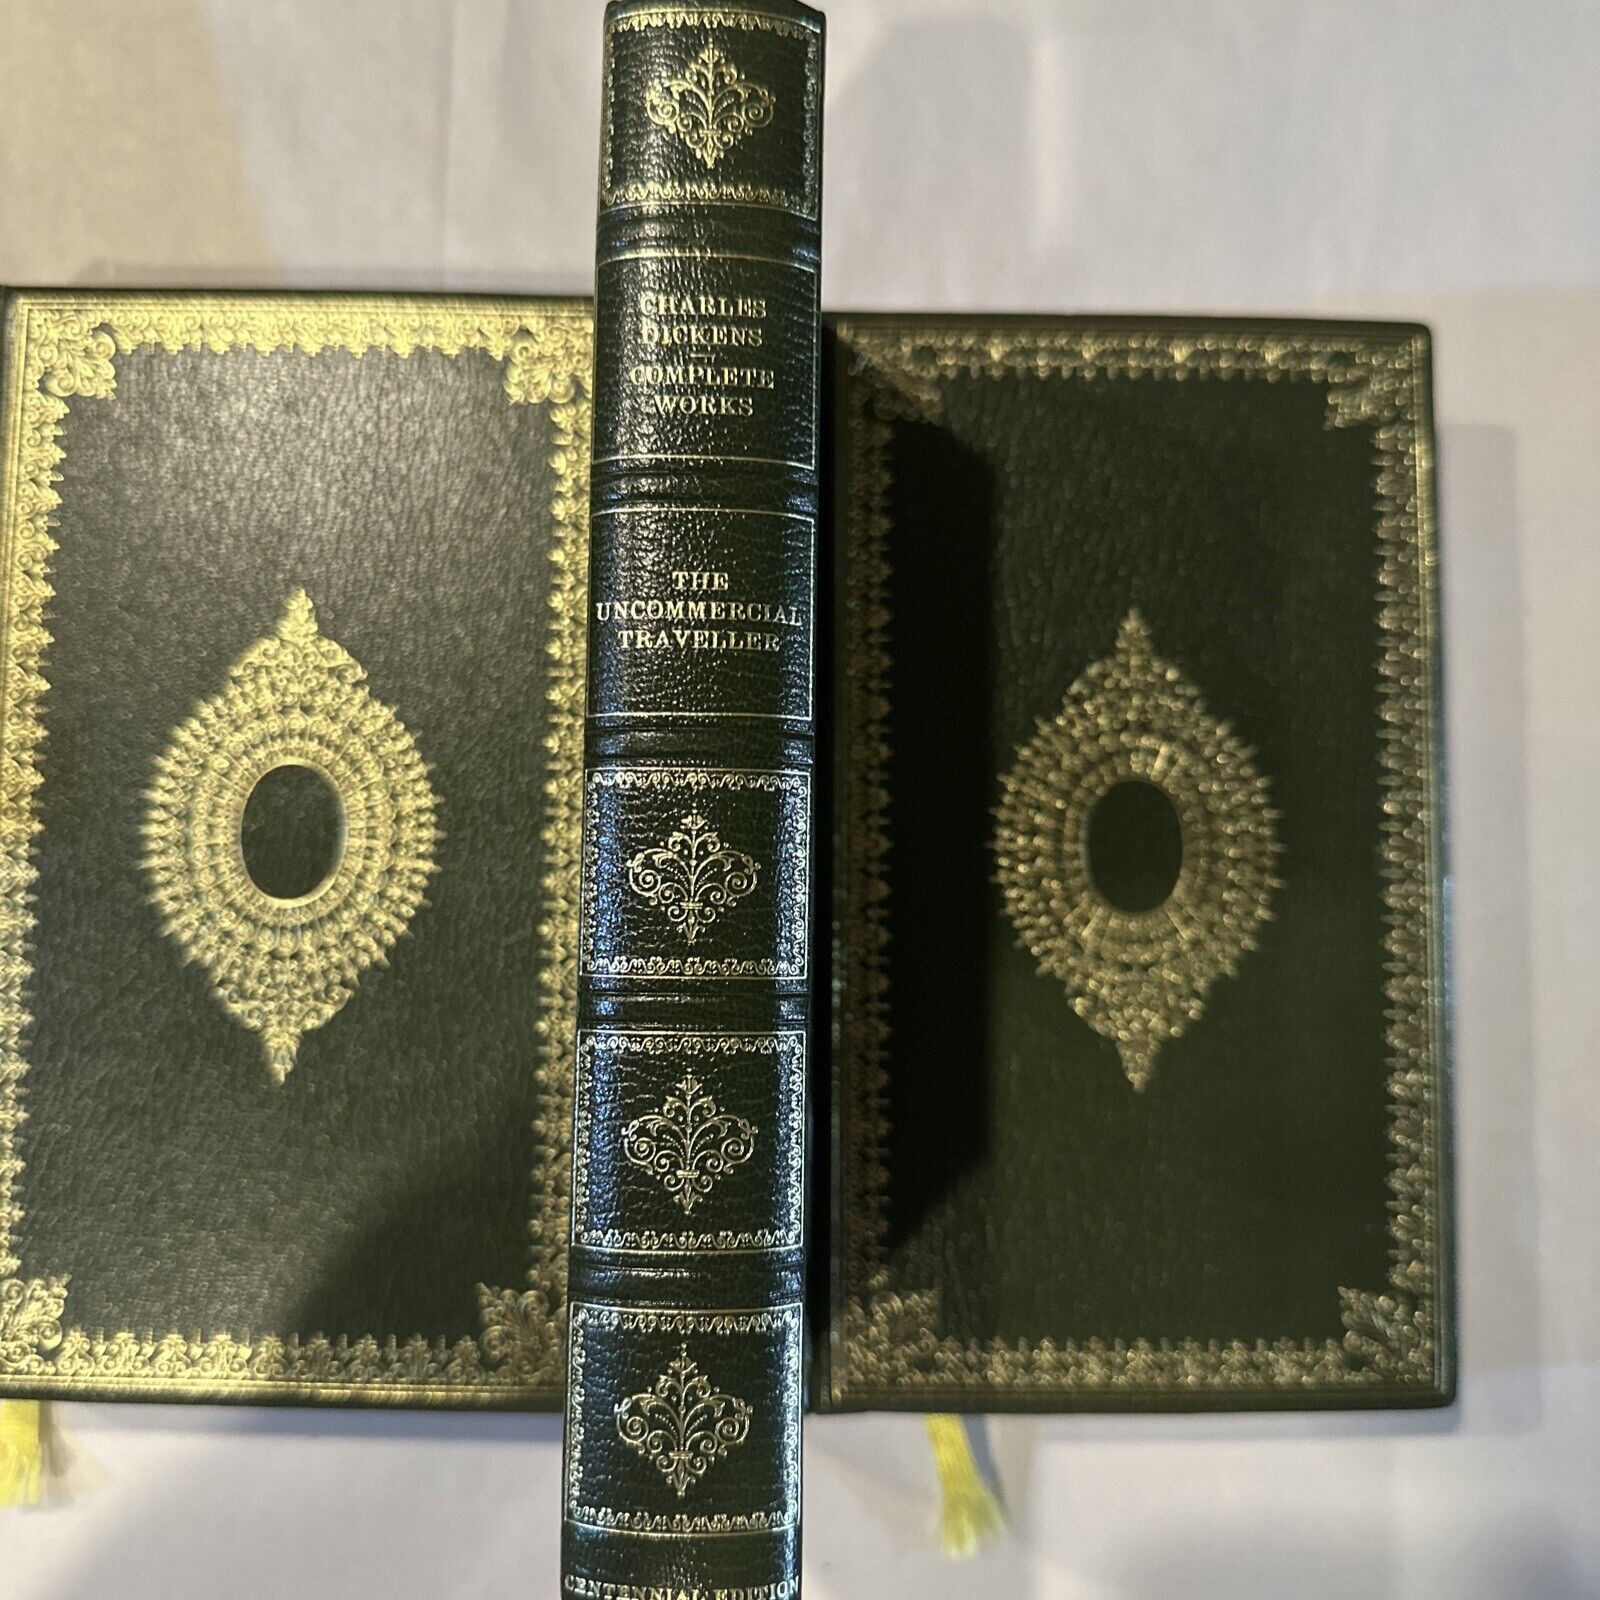 CHARLES DICKENS COMPLETE WORKS CENTENNIAL EDITION The Uncommercial Traveler Rare